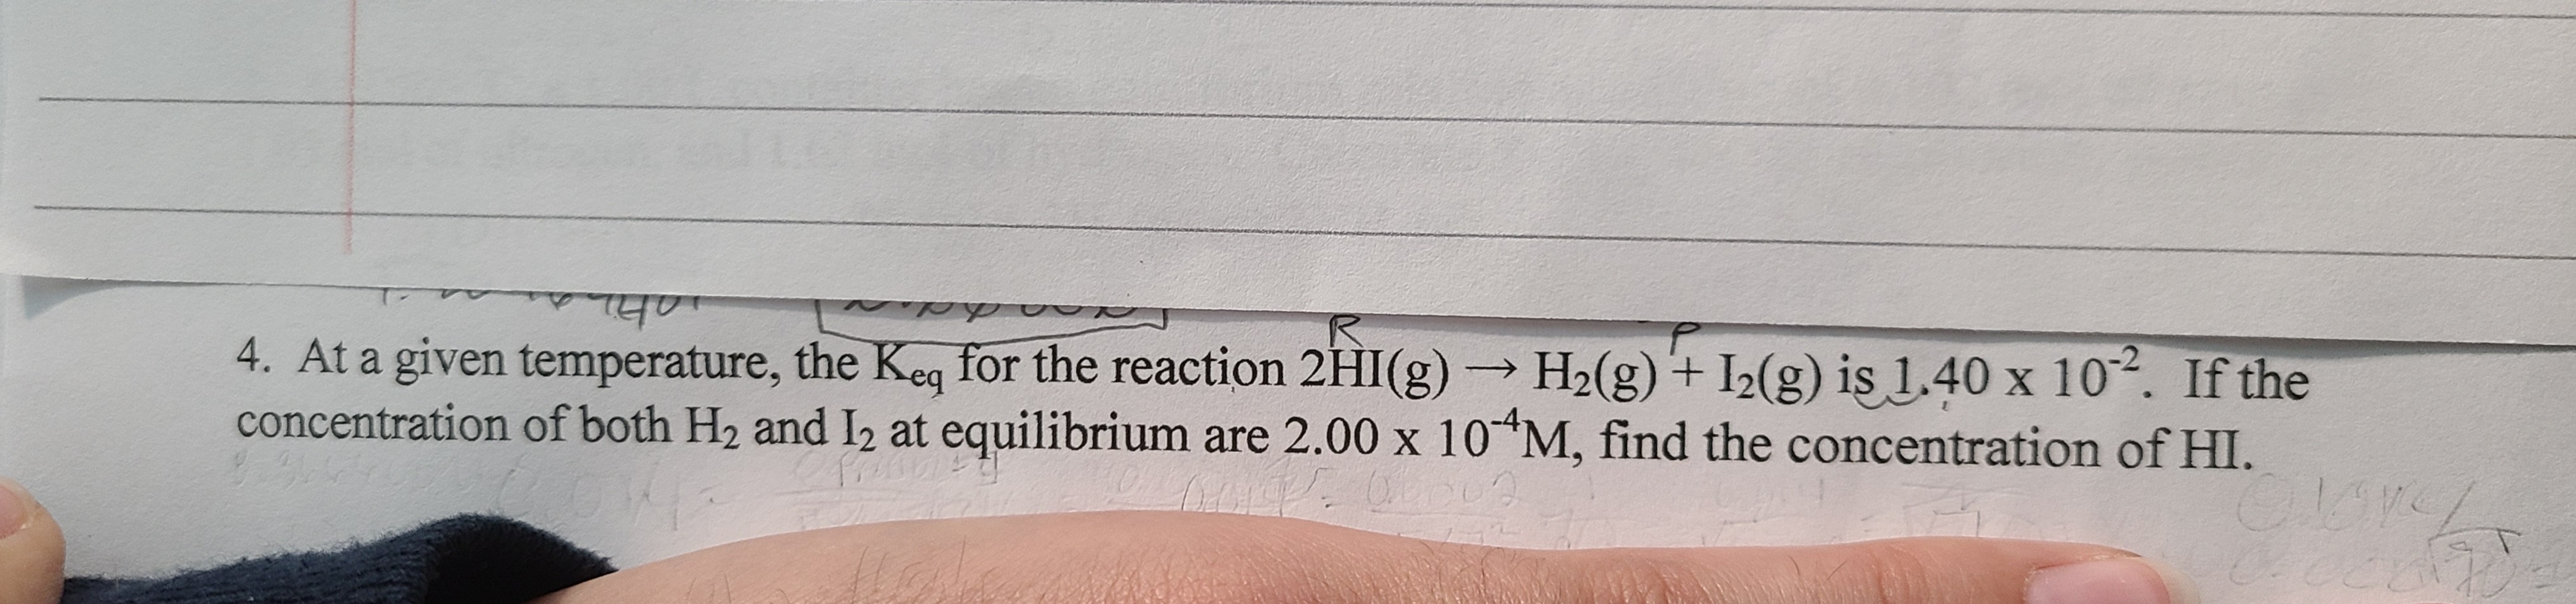 4. At a given temperature, the Keq for the reaction 2HI(g)→ H2(g) + I2(g) is 1.40 x 10. If the
concentration of both H2 and I2 at equilibrium are 2.00 x 10 M, find the concentration of HI.
